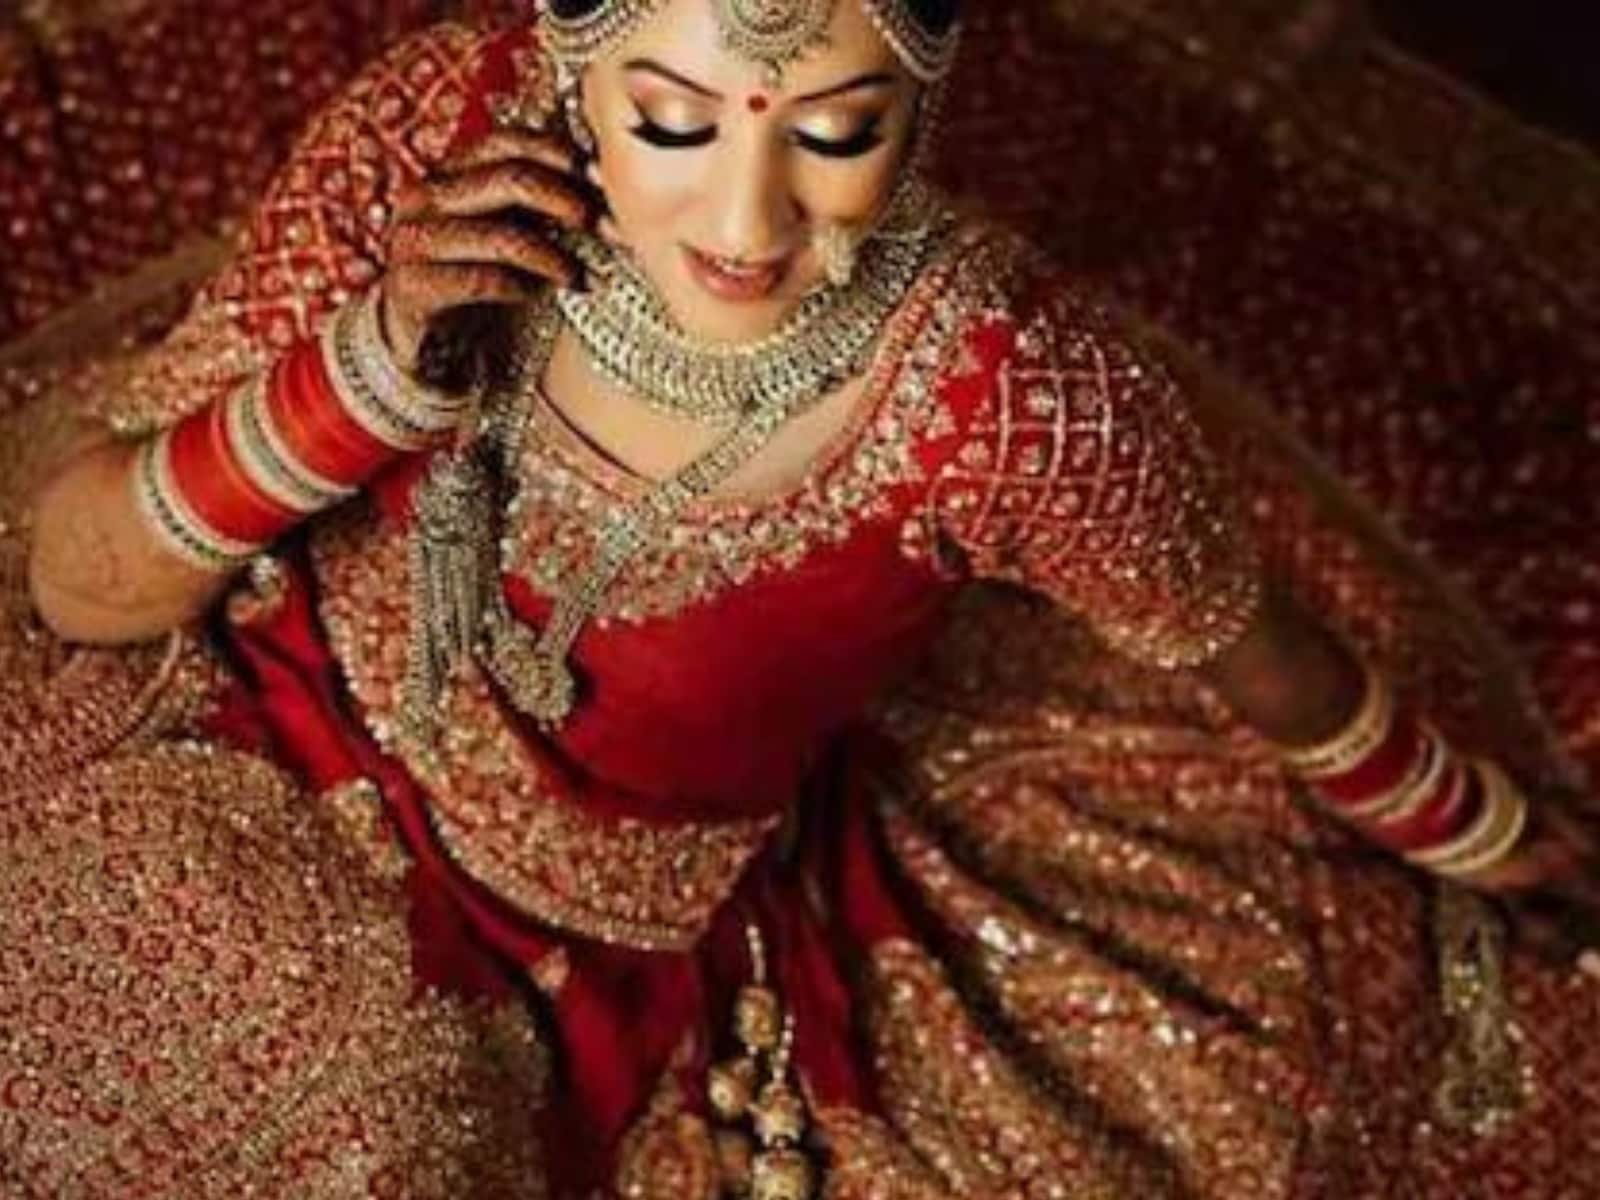 Make-up studio by Rohini Kakade - A bride in a red lehenga looks absolutely  stunning with an airbrushed makeup look created for the bride's wedding.  The bride is glowing with the highlighter